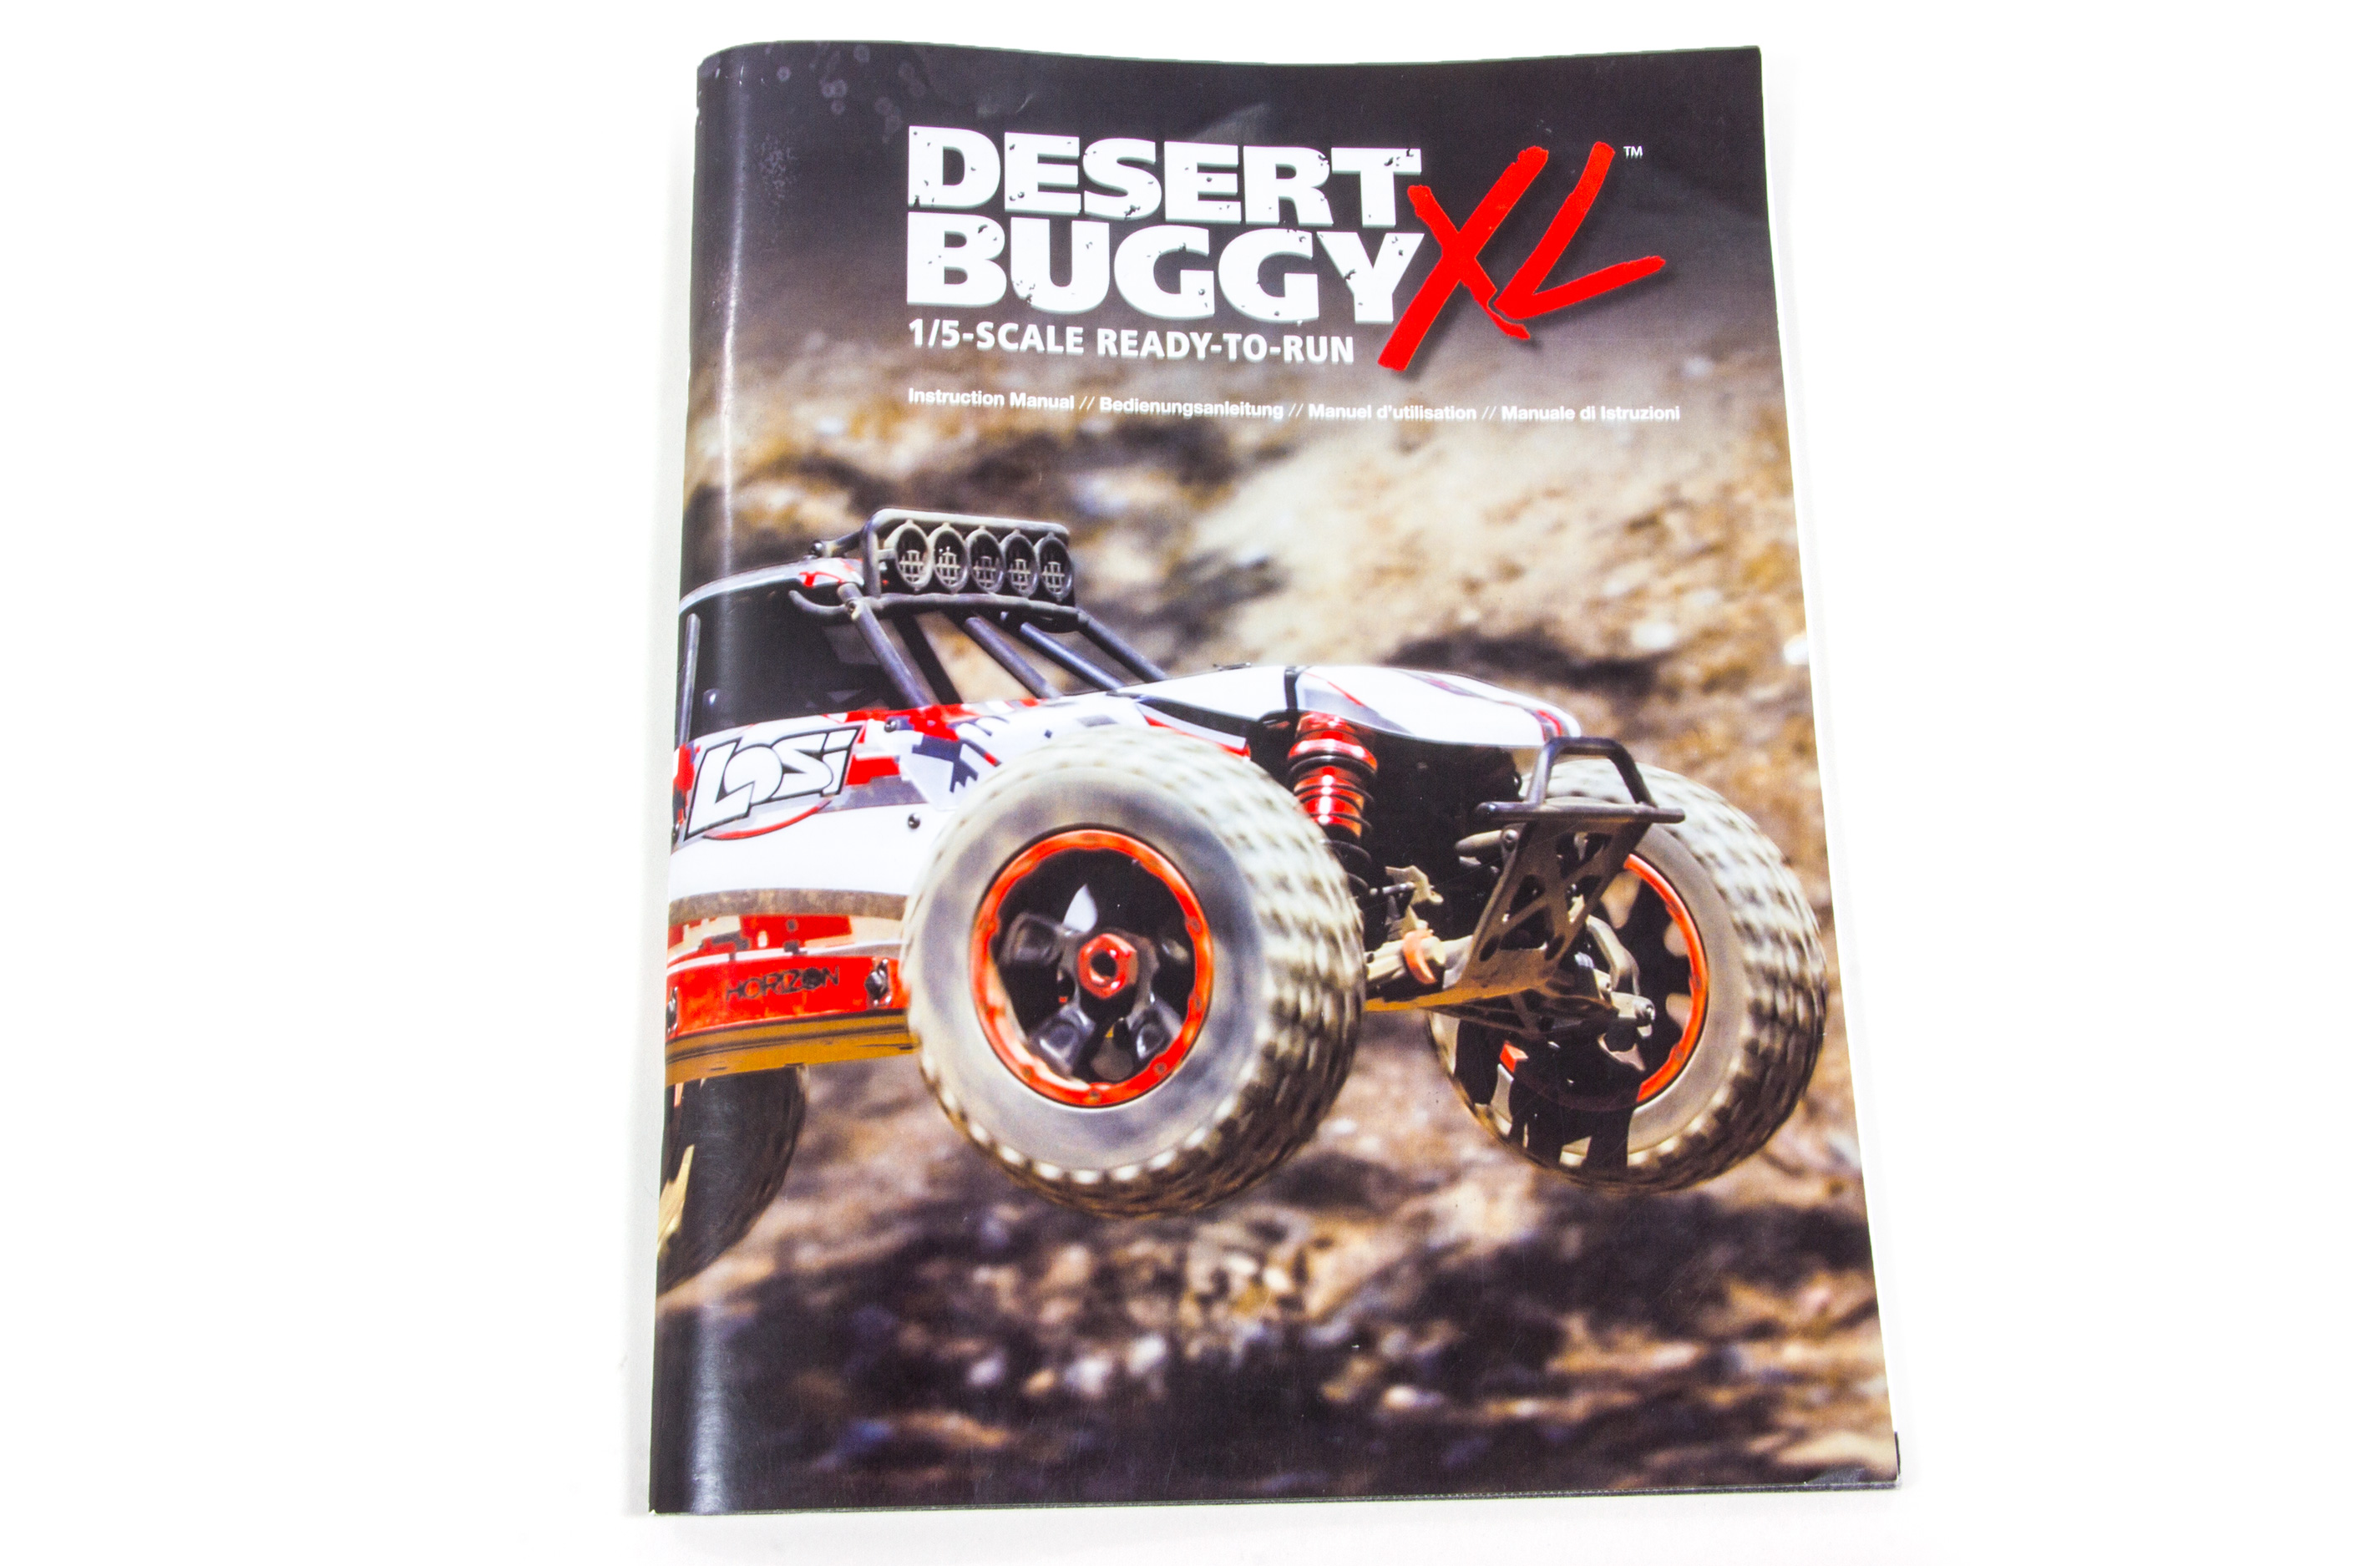 LOS05001/01 Instruction Manual for Desert Buggy XL